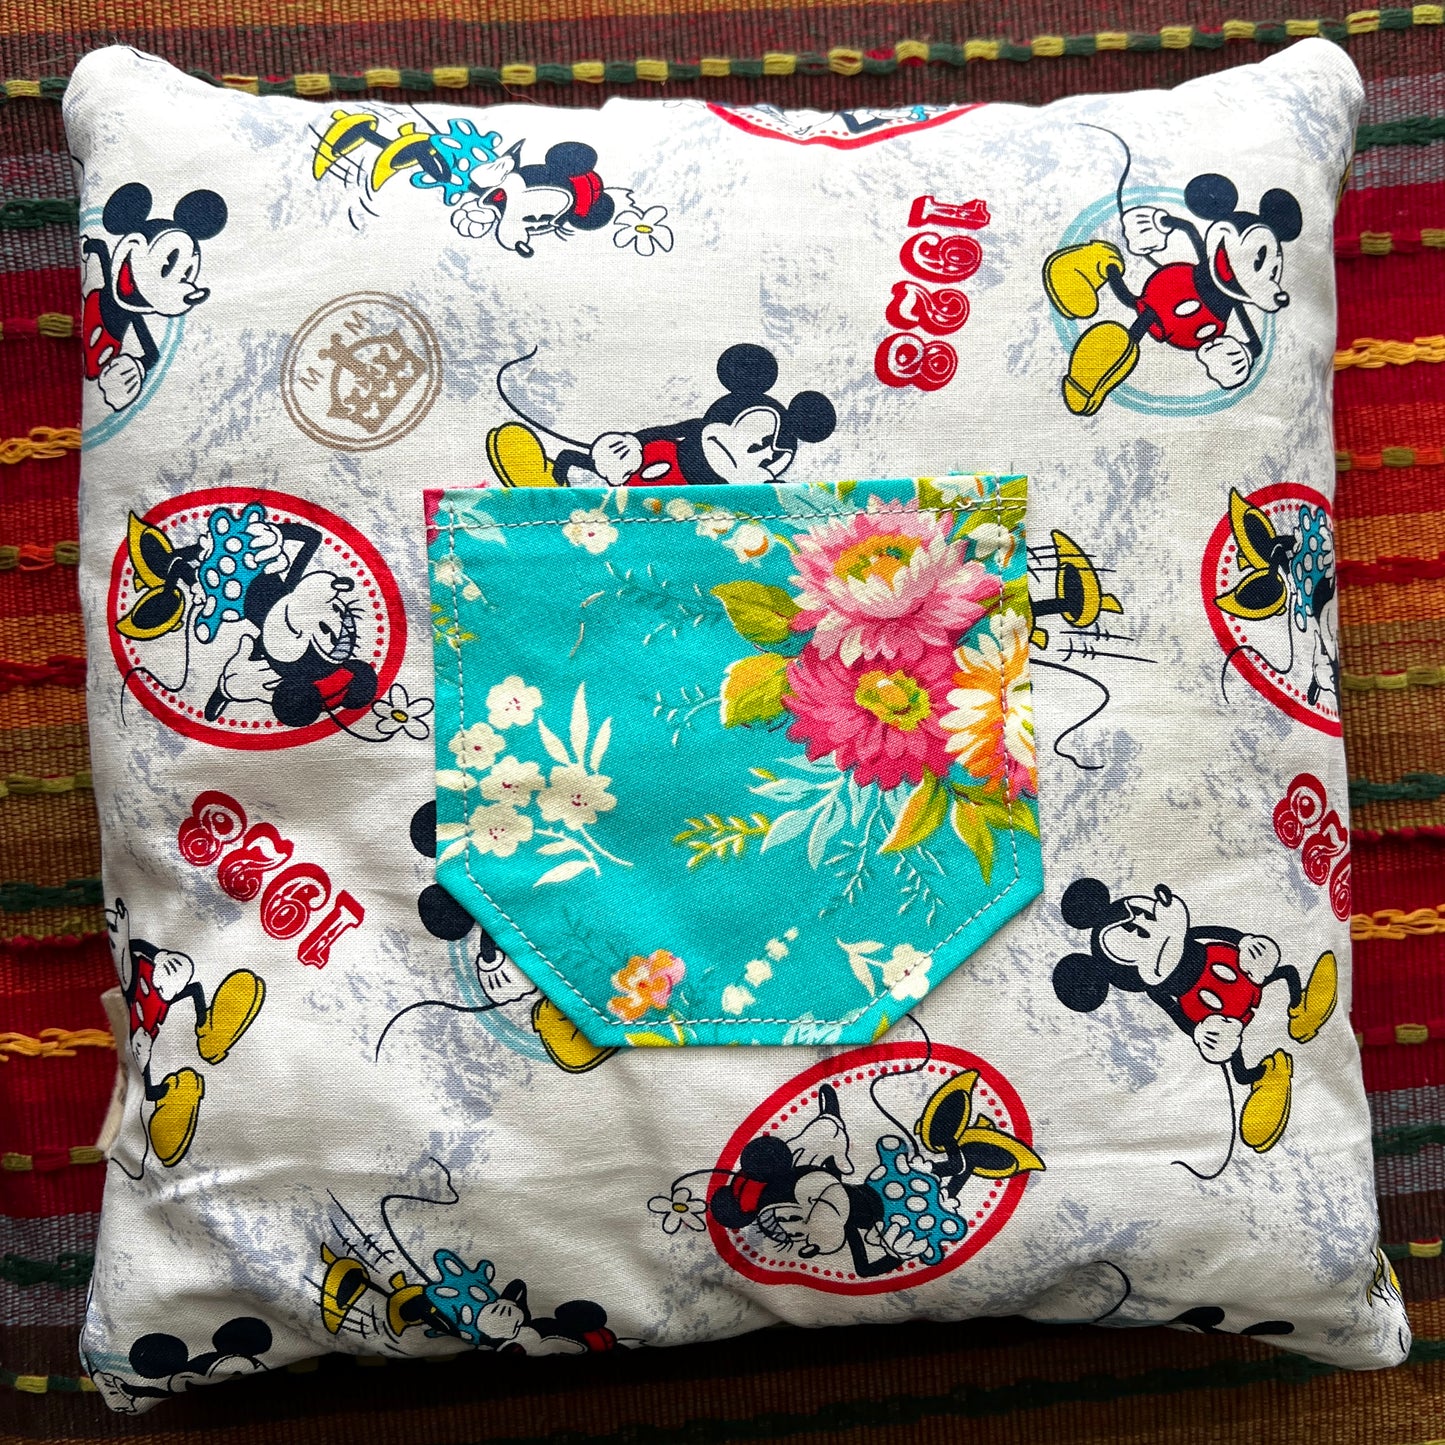 back view of mickey minnie 2 cathedral square pillow, with teal floral pocket